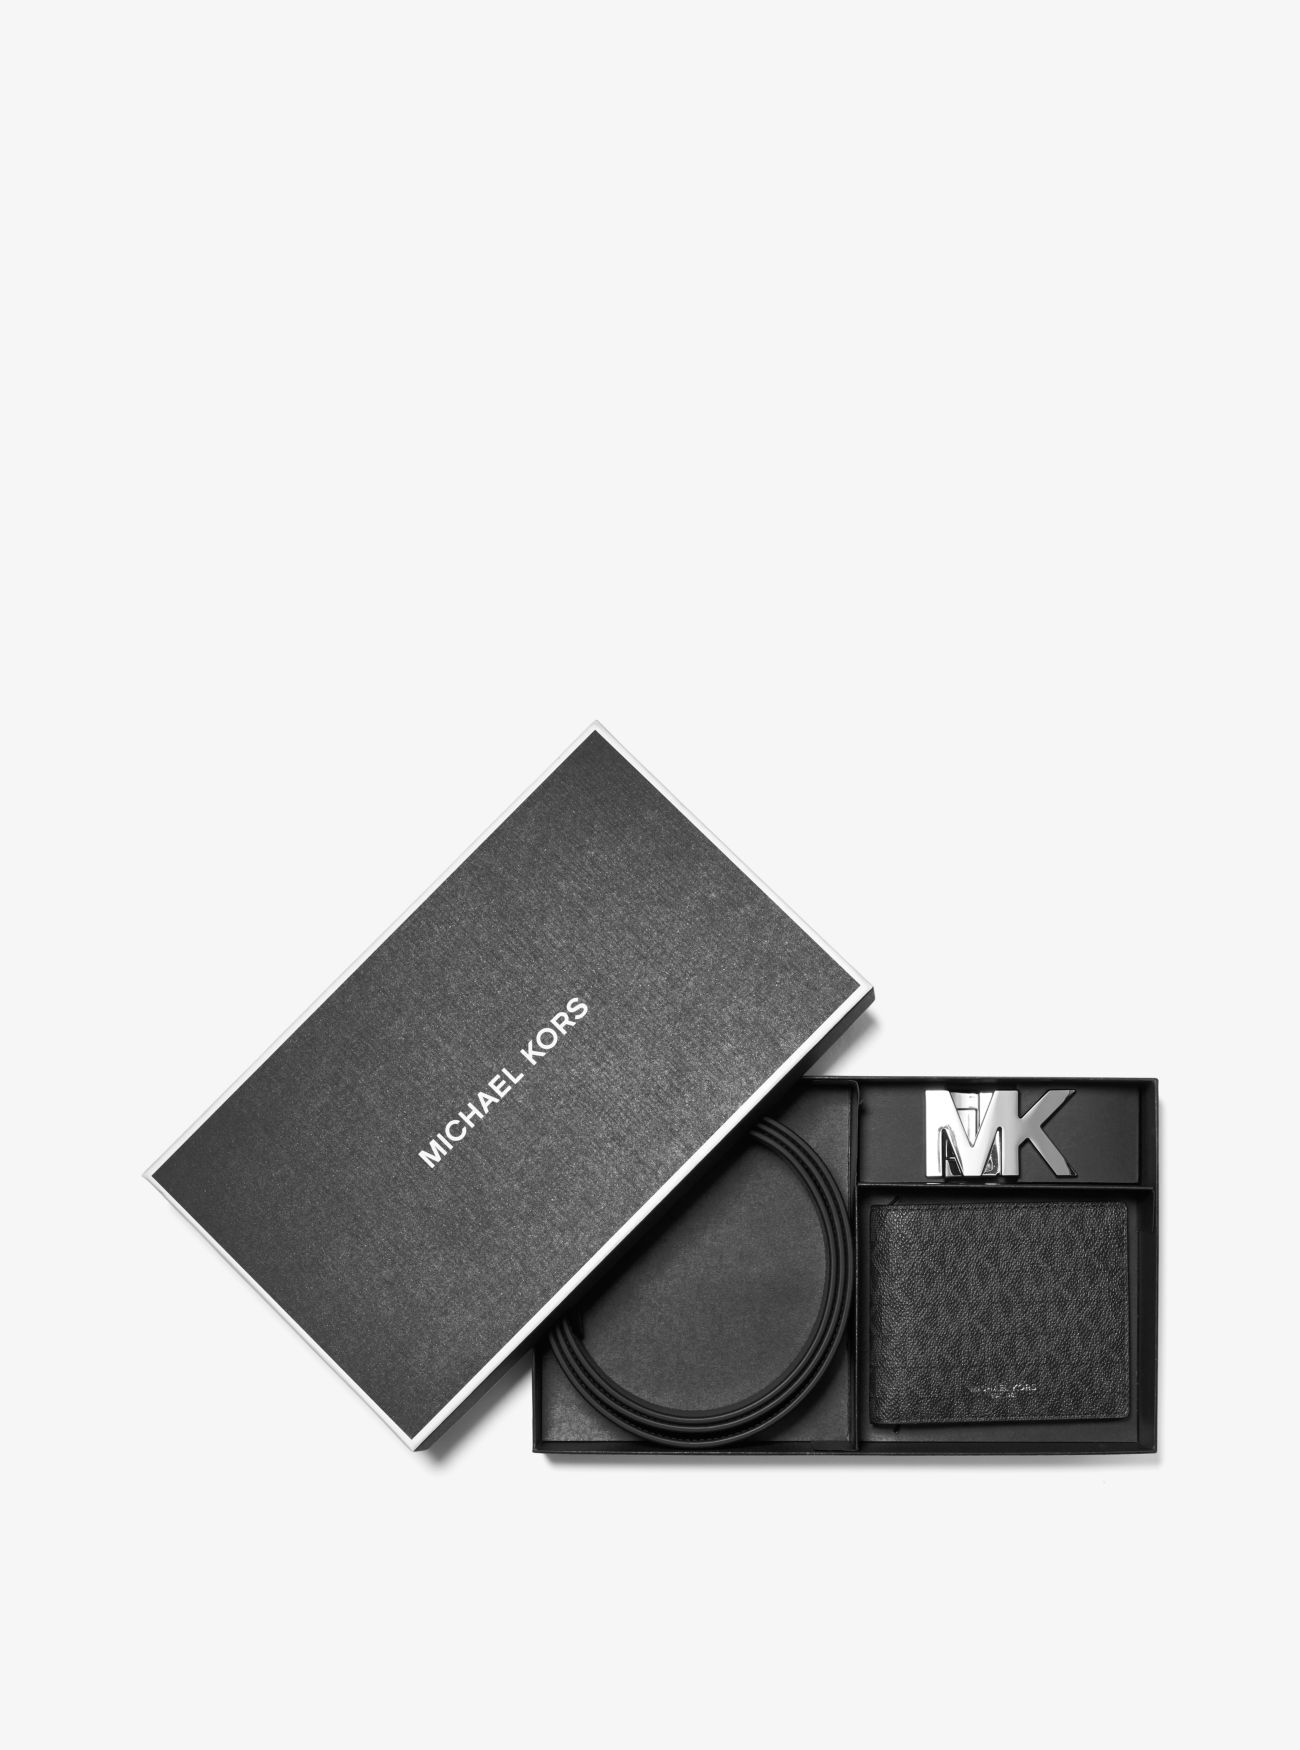 image of a michael kors gift set featuring a black wallet and black belt